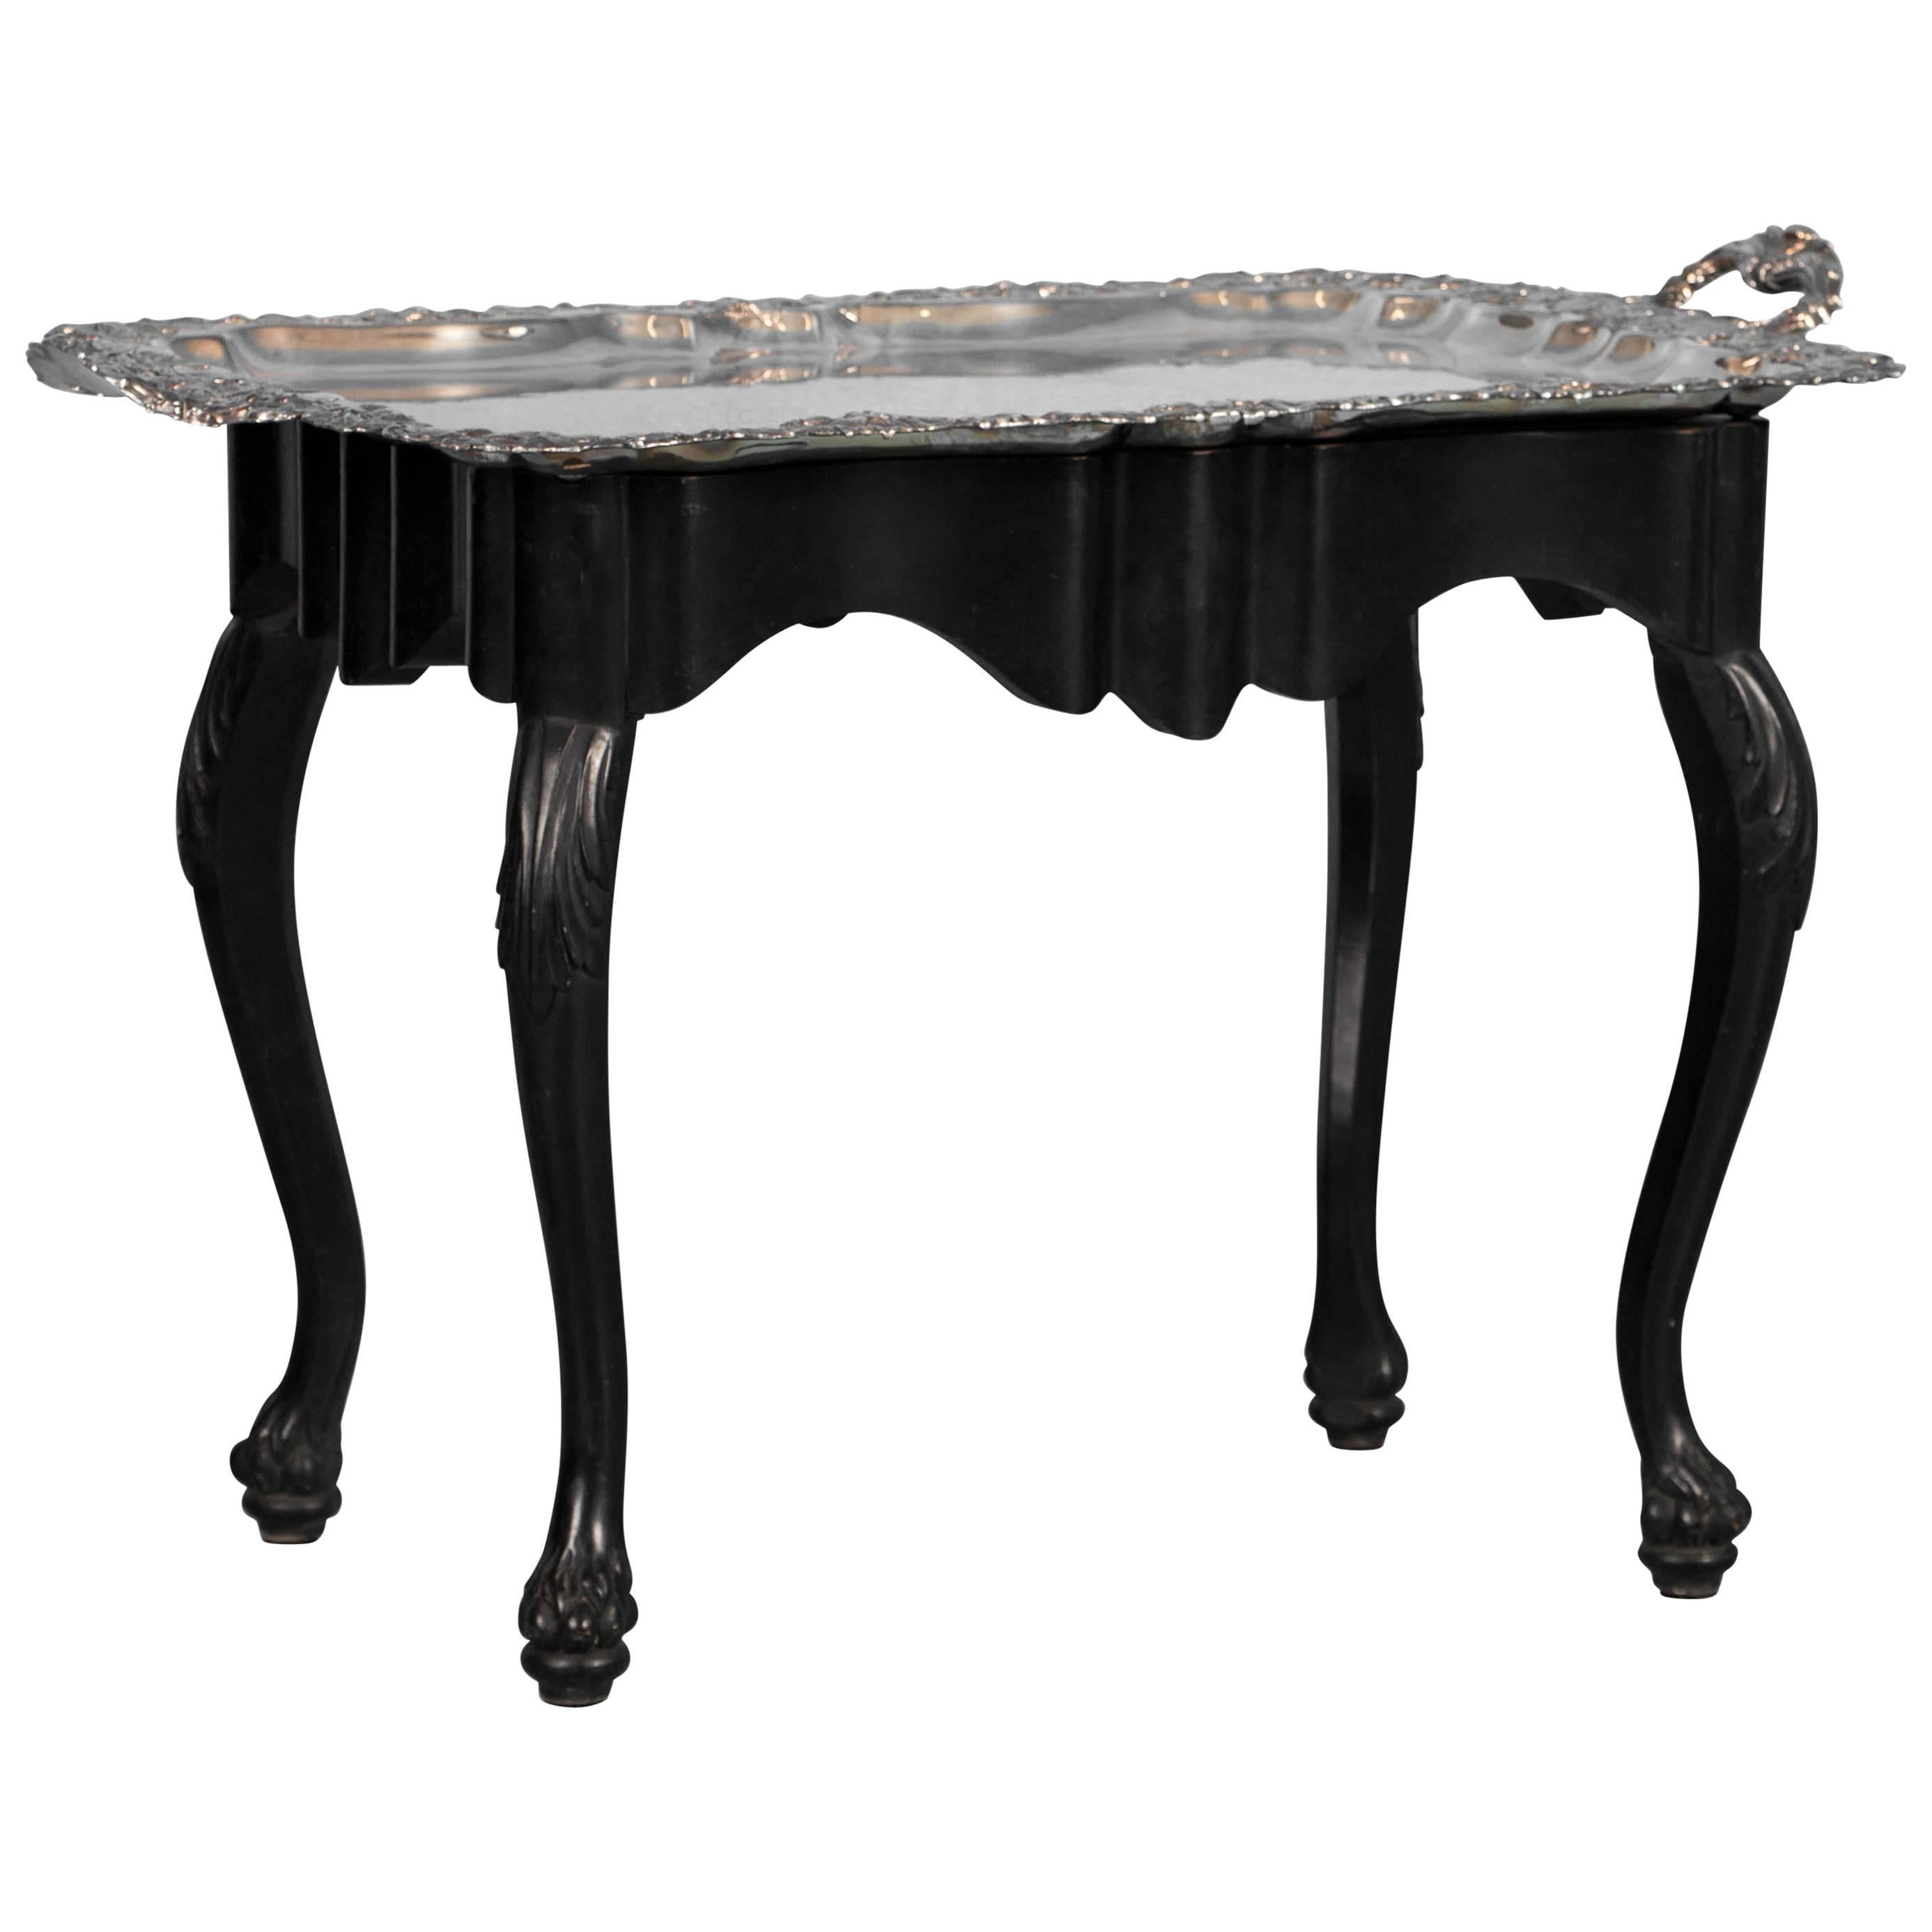 Antique Silver Plate Tray Table on an Ebonized Base